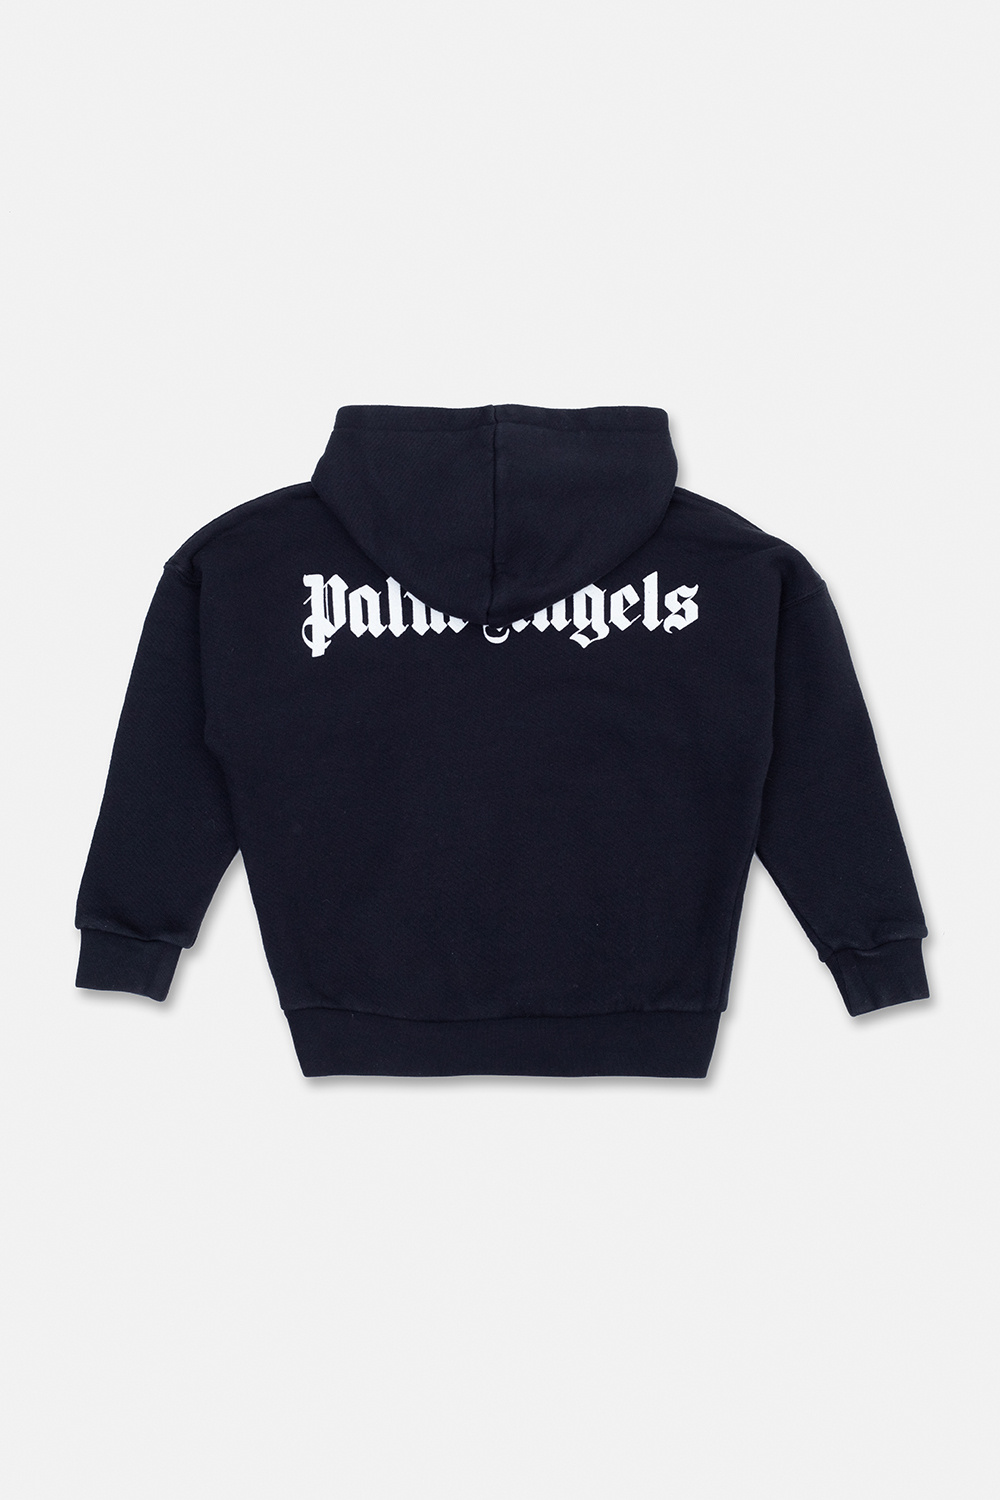 Palm Angels Kids Nike Black Sportswear Fleece Pullover Hoodie to your favourites